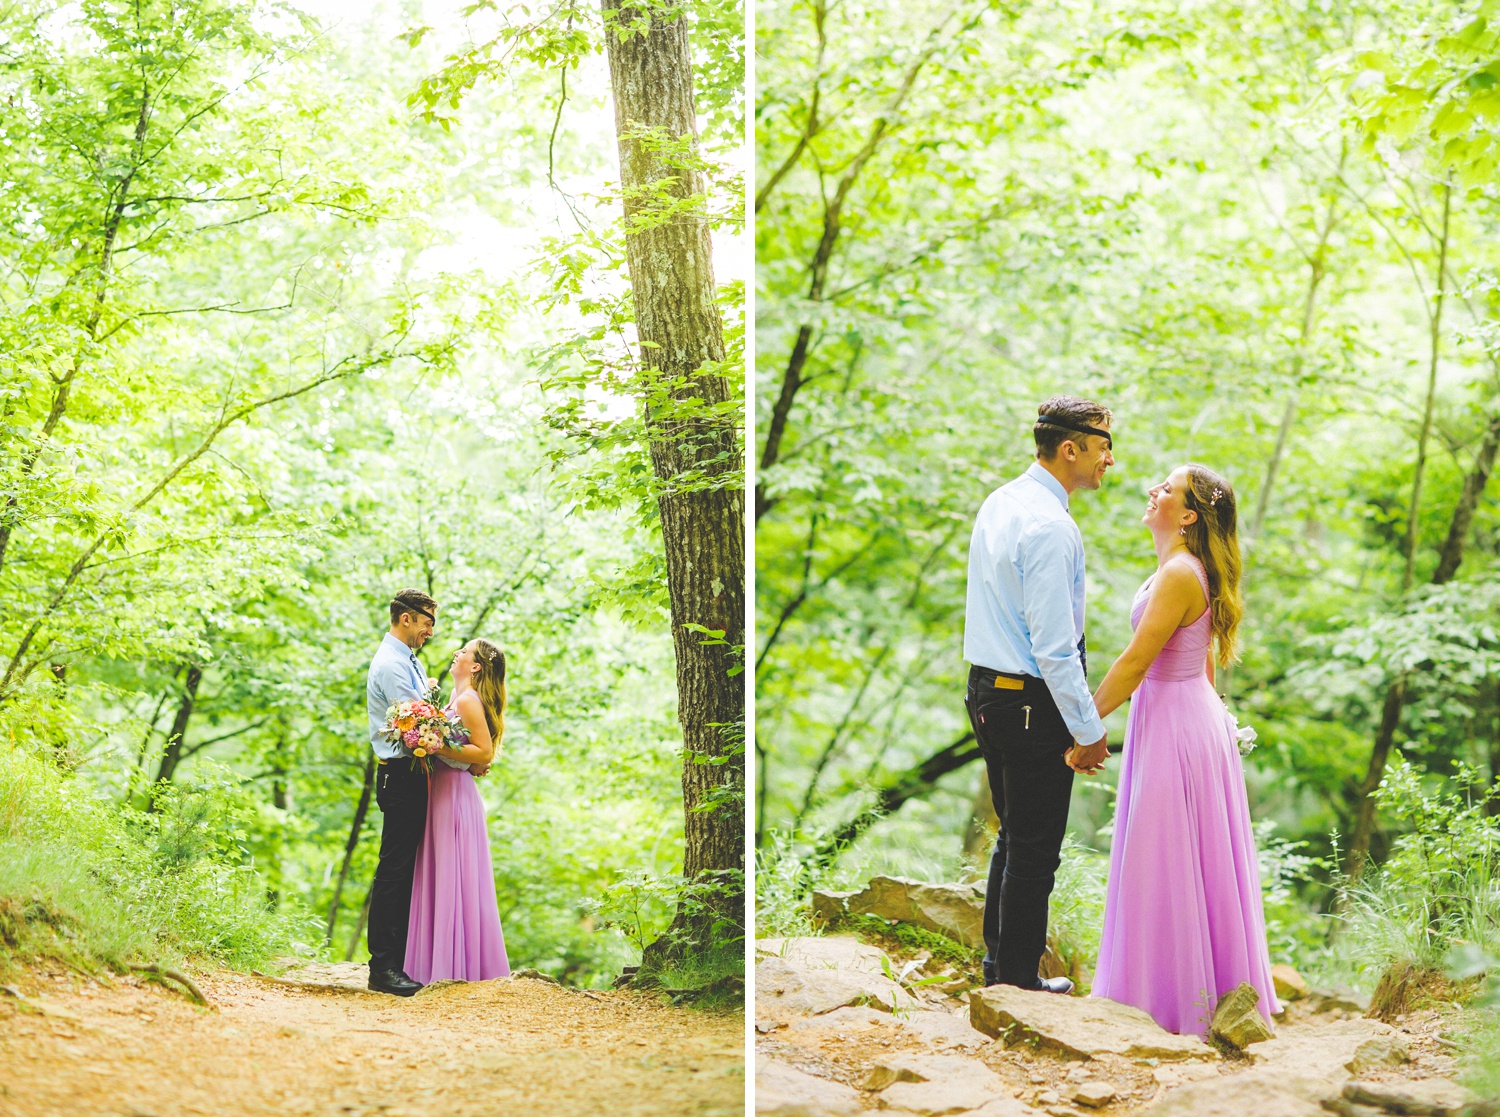 Hiking Elopement with Bride in Purple Dress